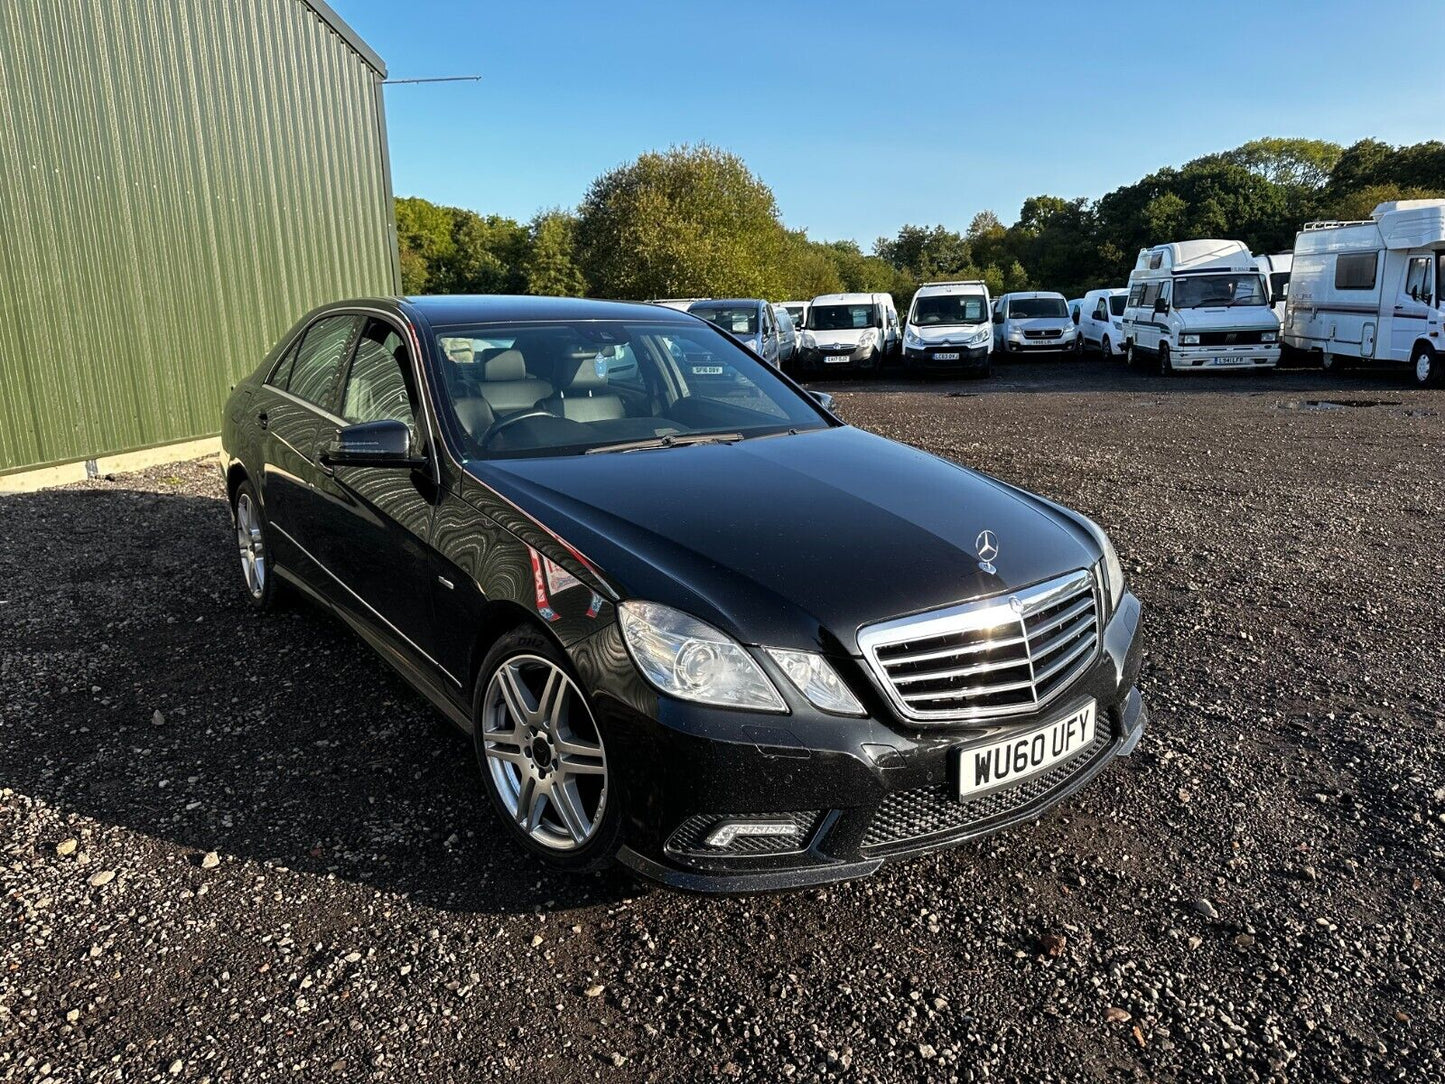 Bid on 60 PLATE MERCEDES-BENZ E CLASS E220 2.2 CDI BLUEEFFICIENCY SPORT AUTOMATIC - NO VAT ON HAMMER- Buy &amp; Sell on Auction with EAMA Group